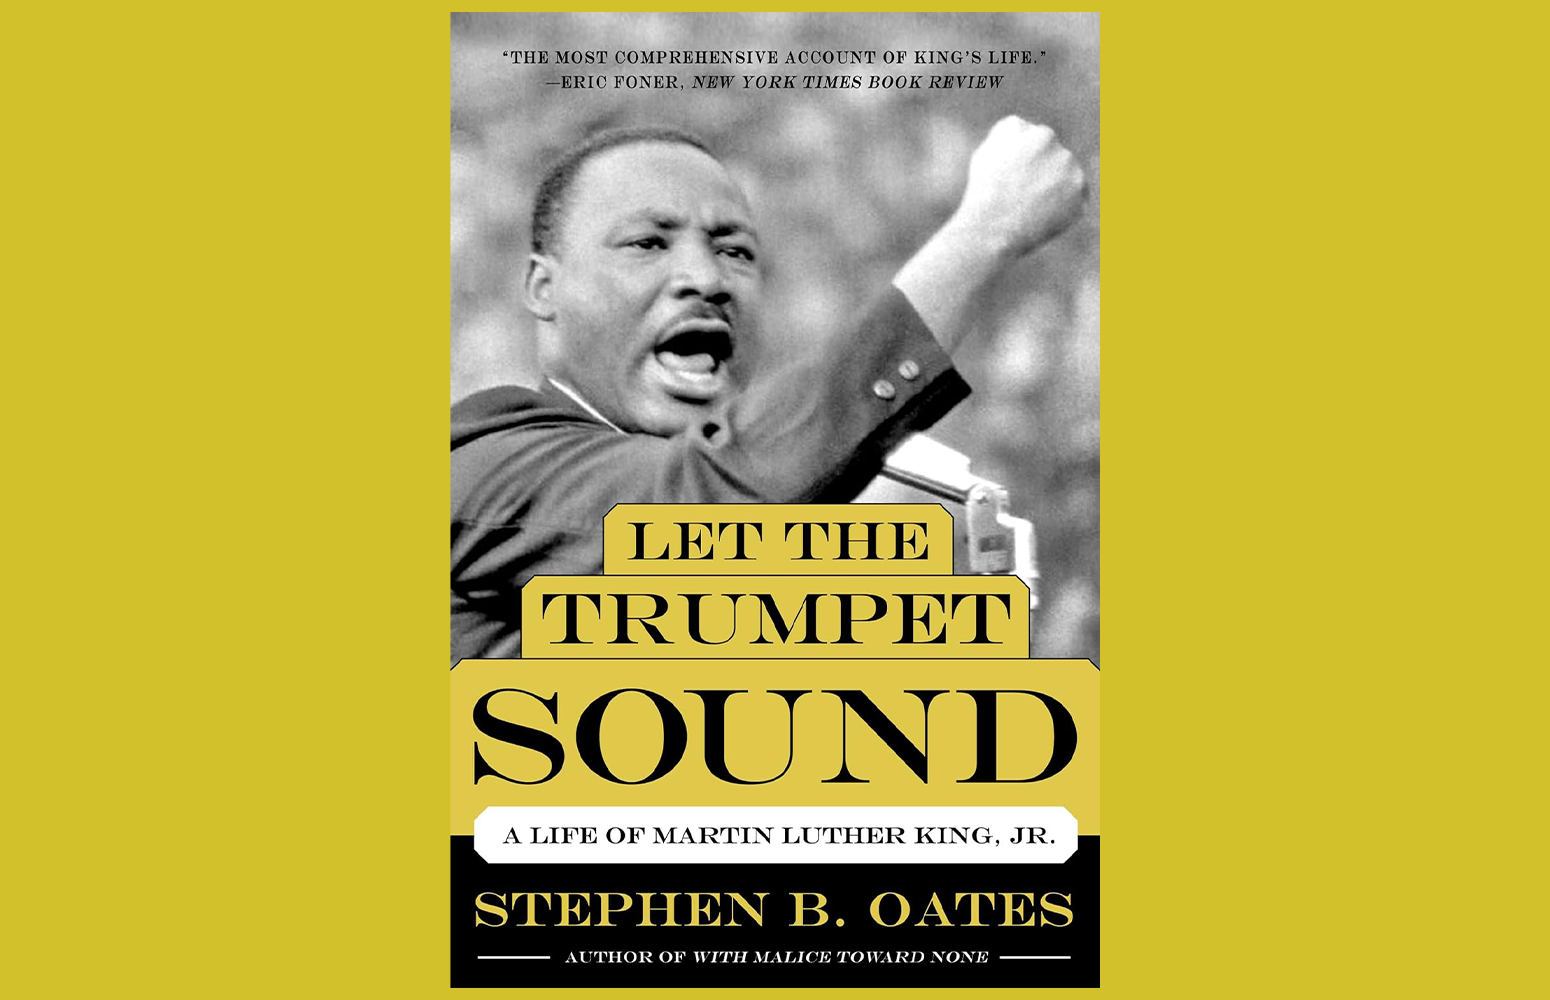 Let The Trumpet Sound: A Life Of Martin Luther King, Jr. 7 of 15